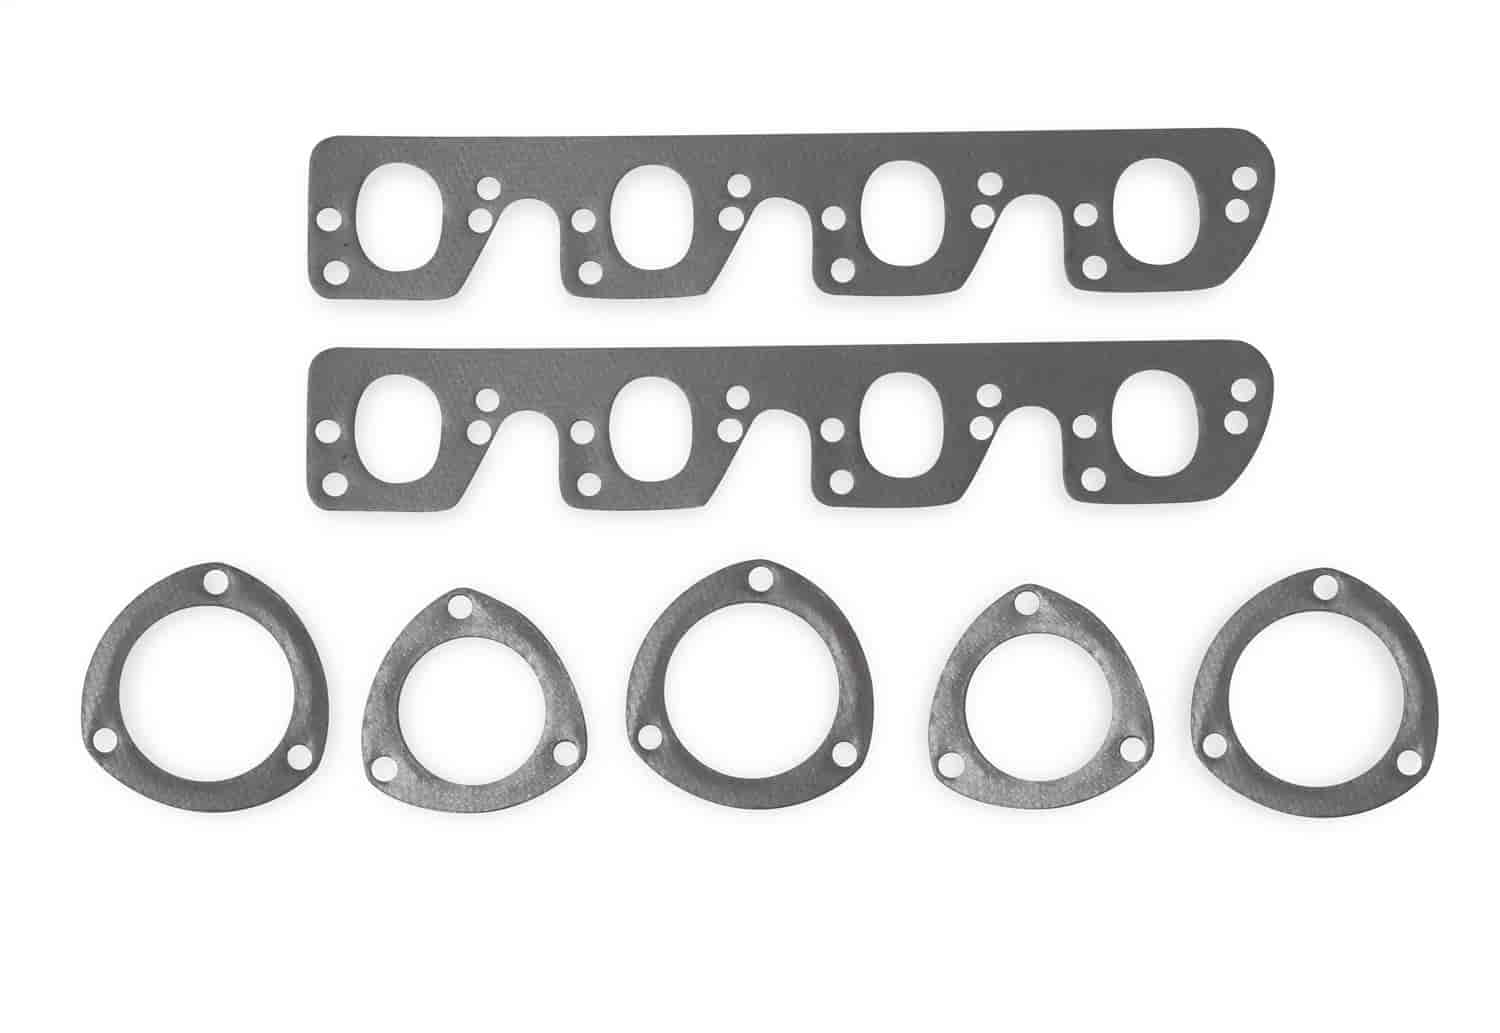 Header Replacement Gasket Set Ford Cleveland/Modified Includes 2.5" and 3" Collector Gaskets in Pairs